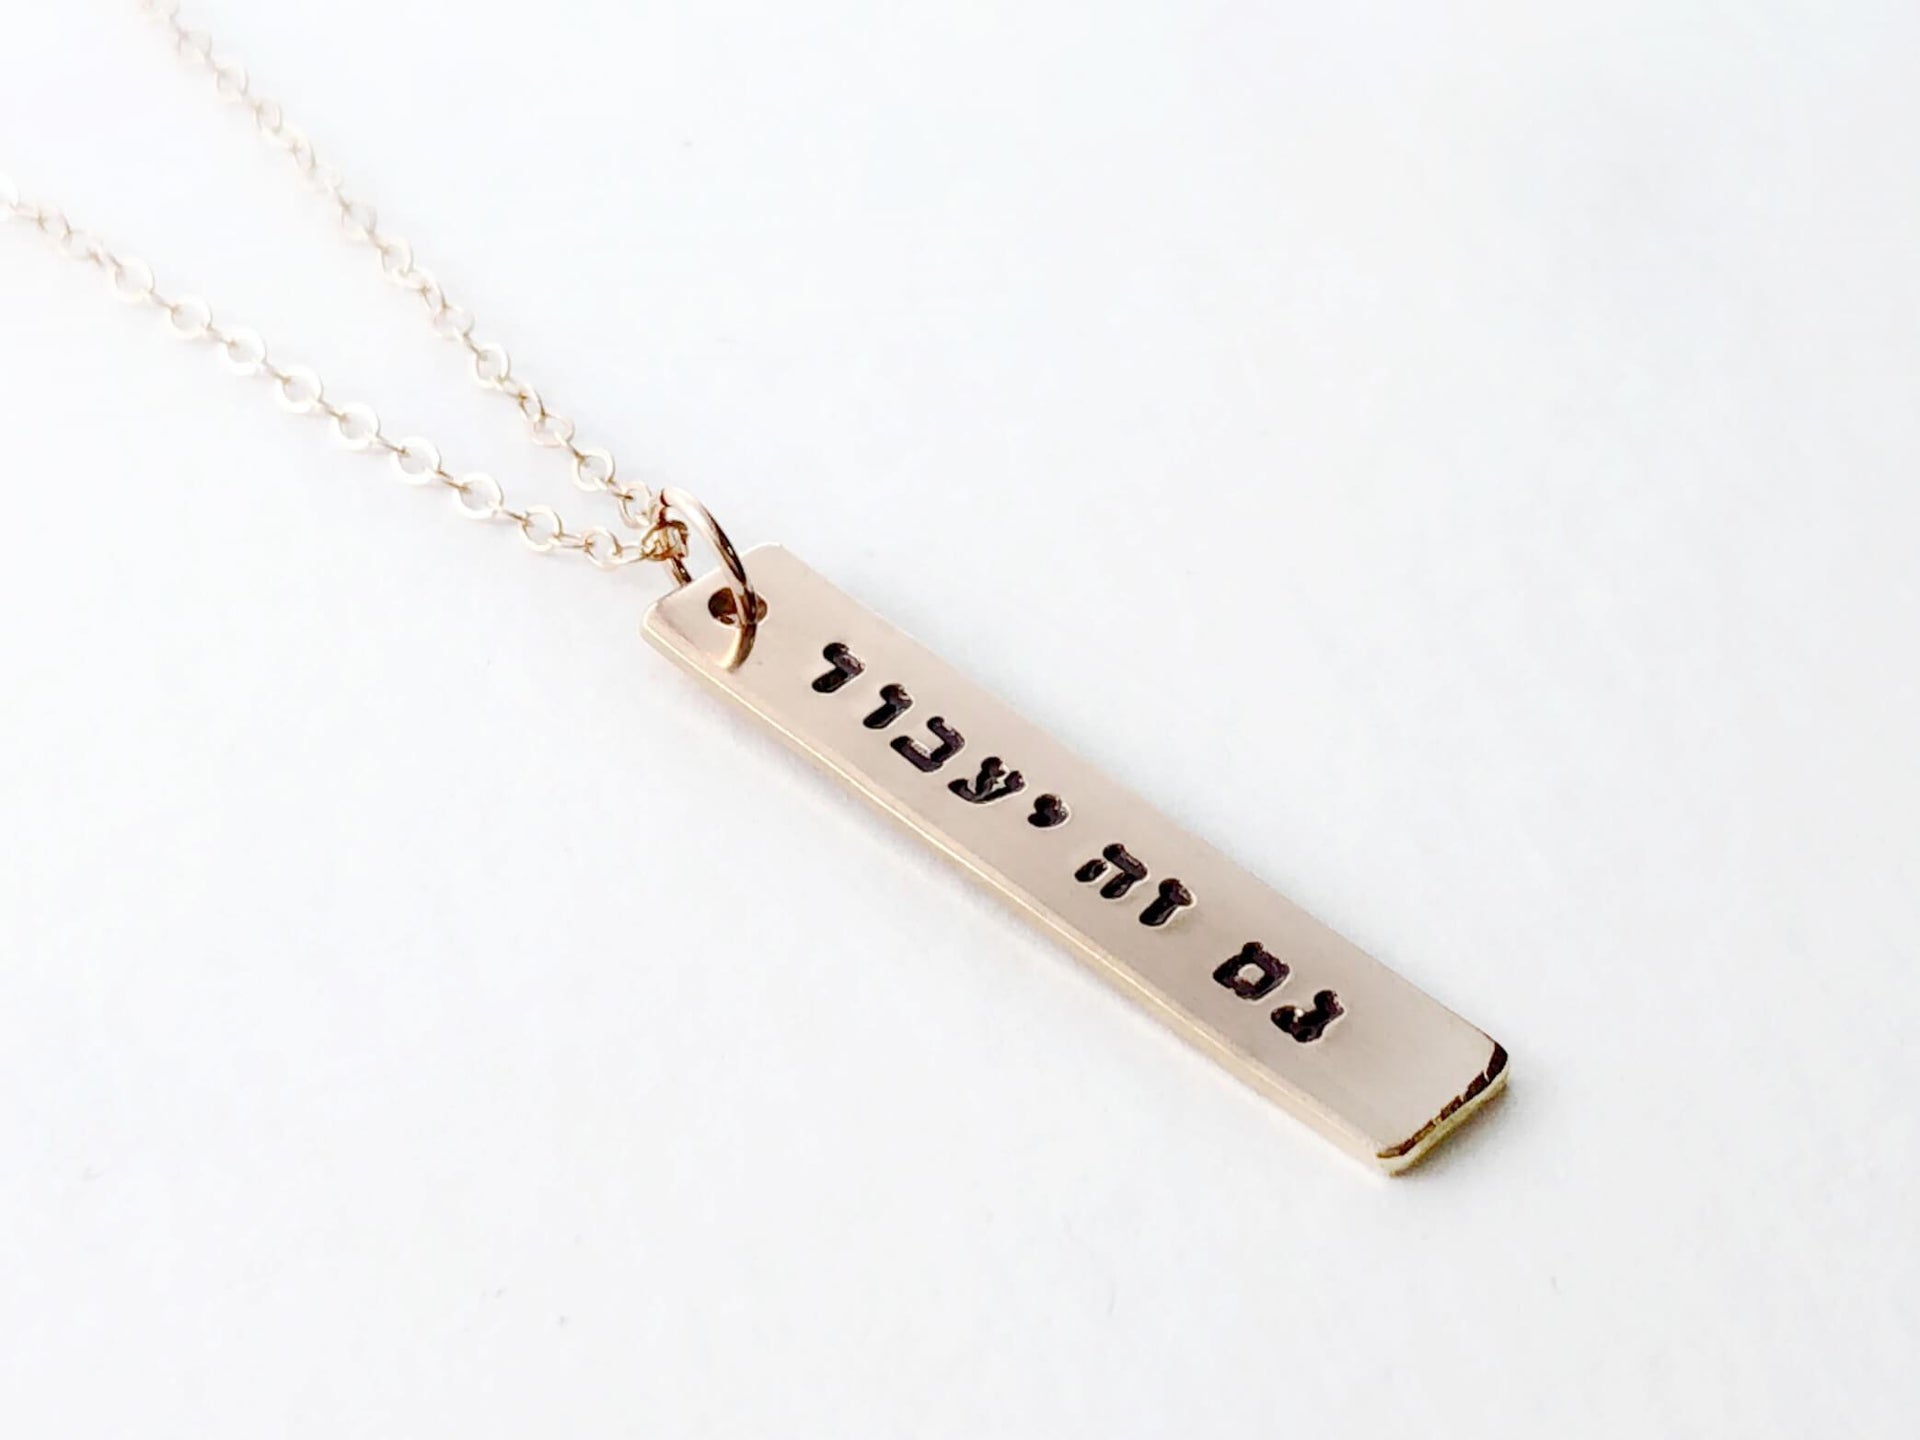 Everything Beautiful Necklaces Rose Gold-Filled This Too Shall Pass Vertical Bar Necklace - Gold, Rose Gold or Sterling Silver